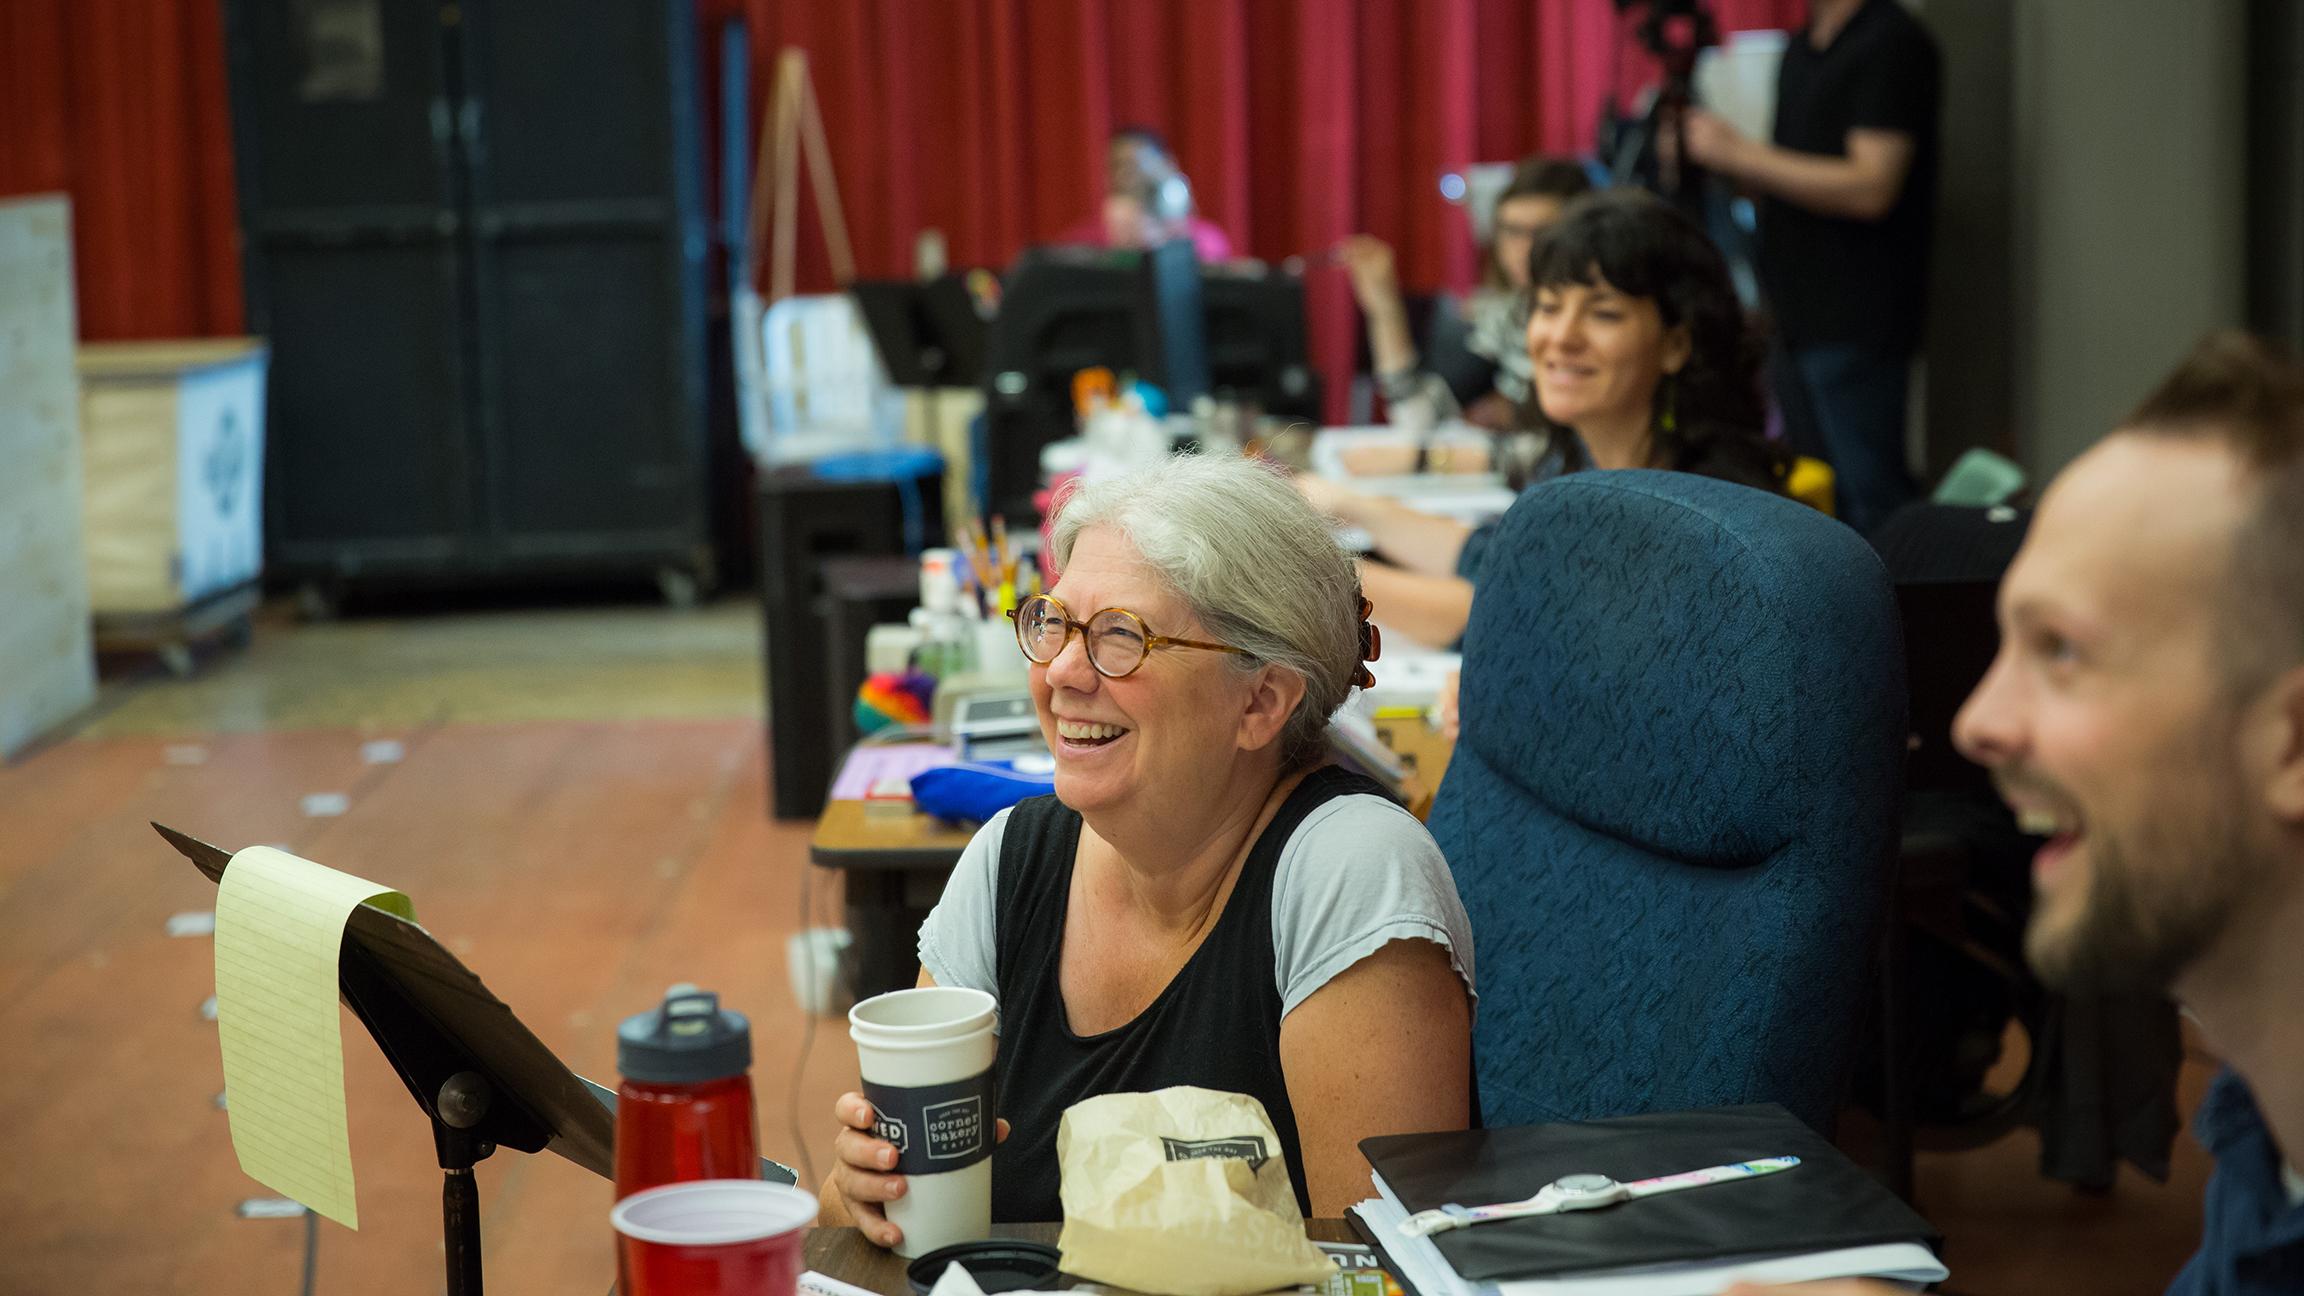 Director Mary Zimmerman leads a rehearsal for “Wonderful Town,” on stage at Goodman Theatre Sept. 10 through Oct. 16, 2016. (Liz Lauren / Goodman Theatre)